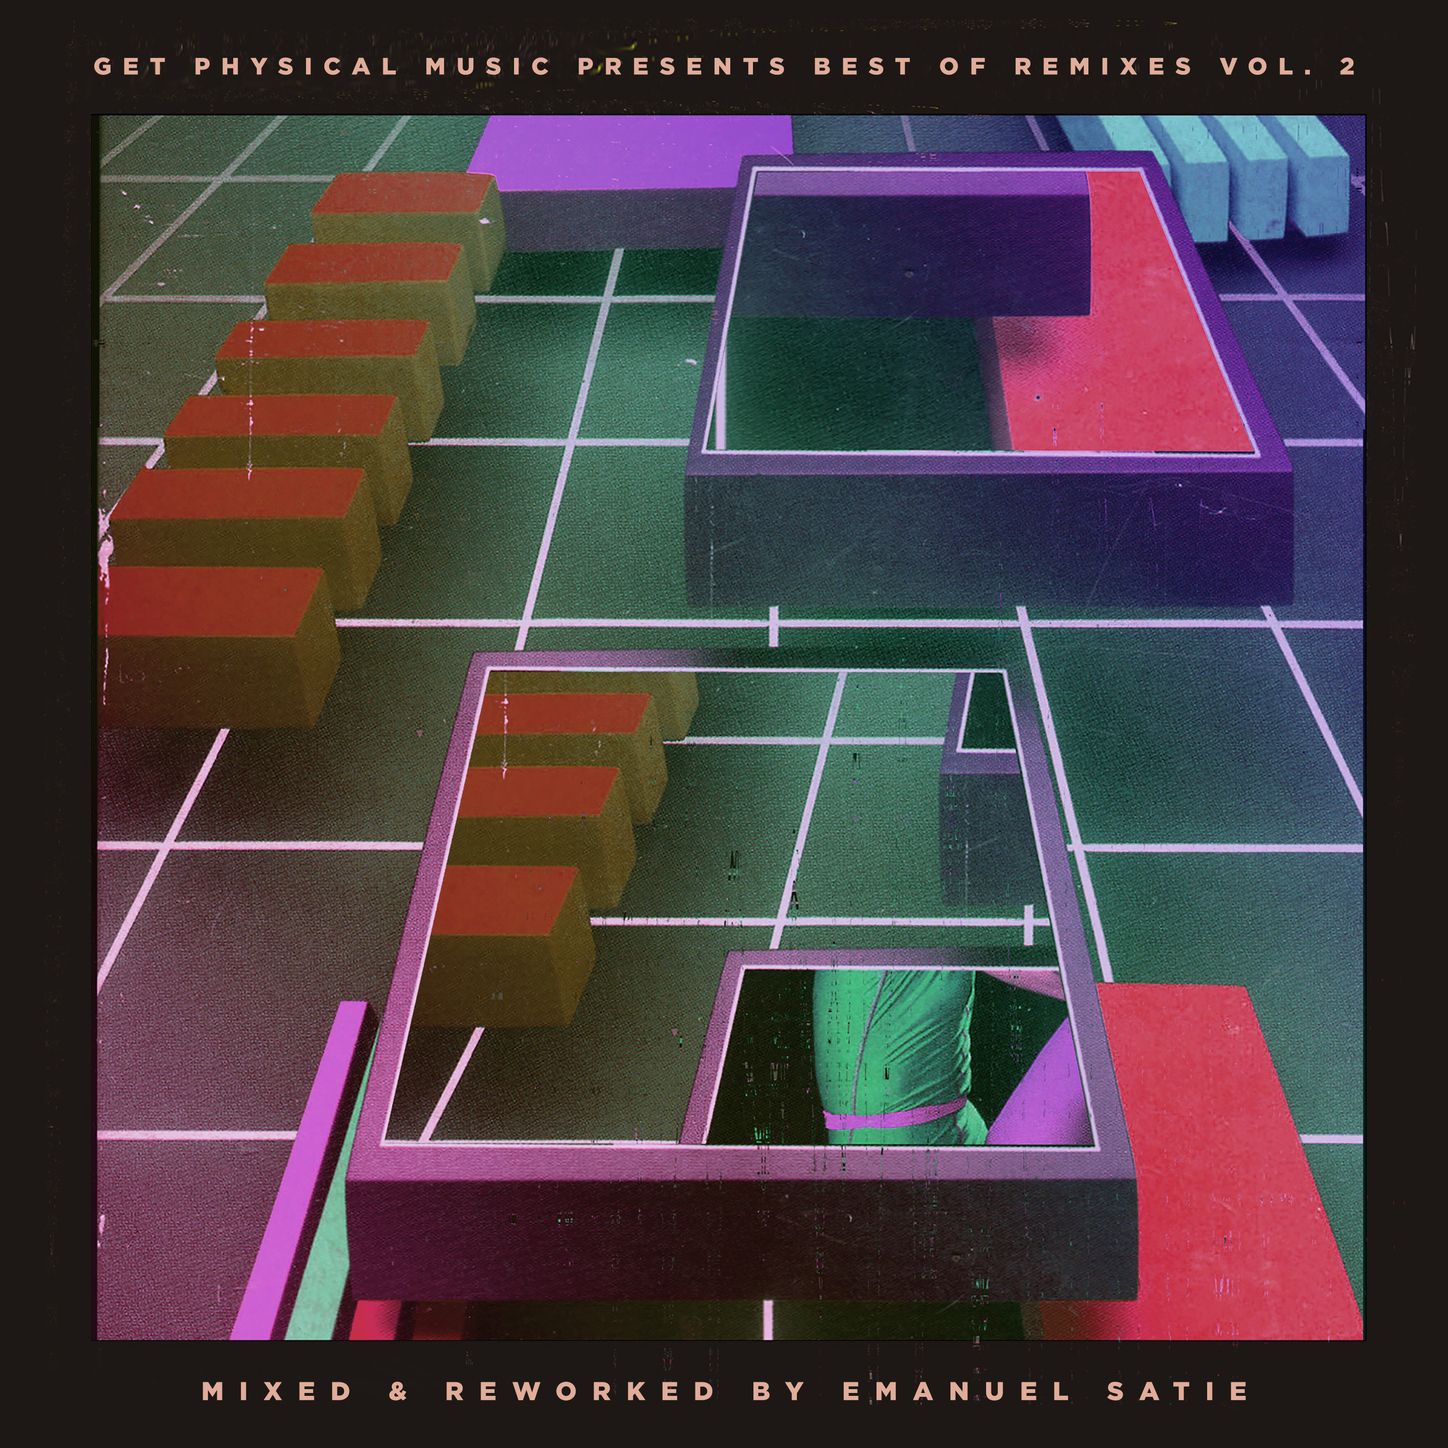 Get Physical Music Presents: Best of Remixes, Vol. 2 - Mixed and Reworked by Emanuel Satie